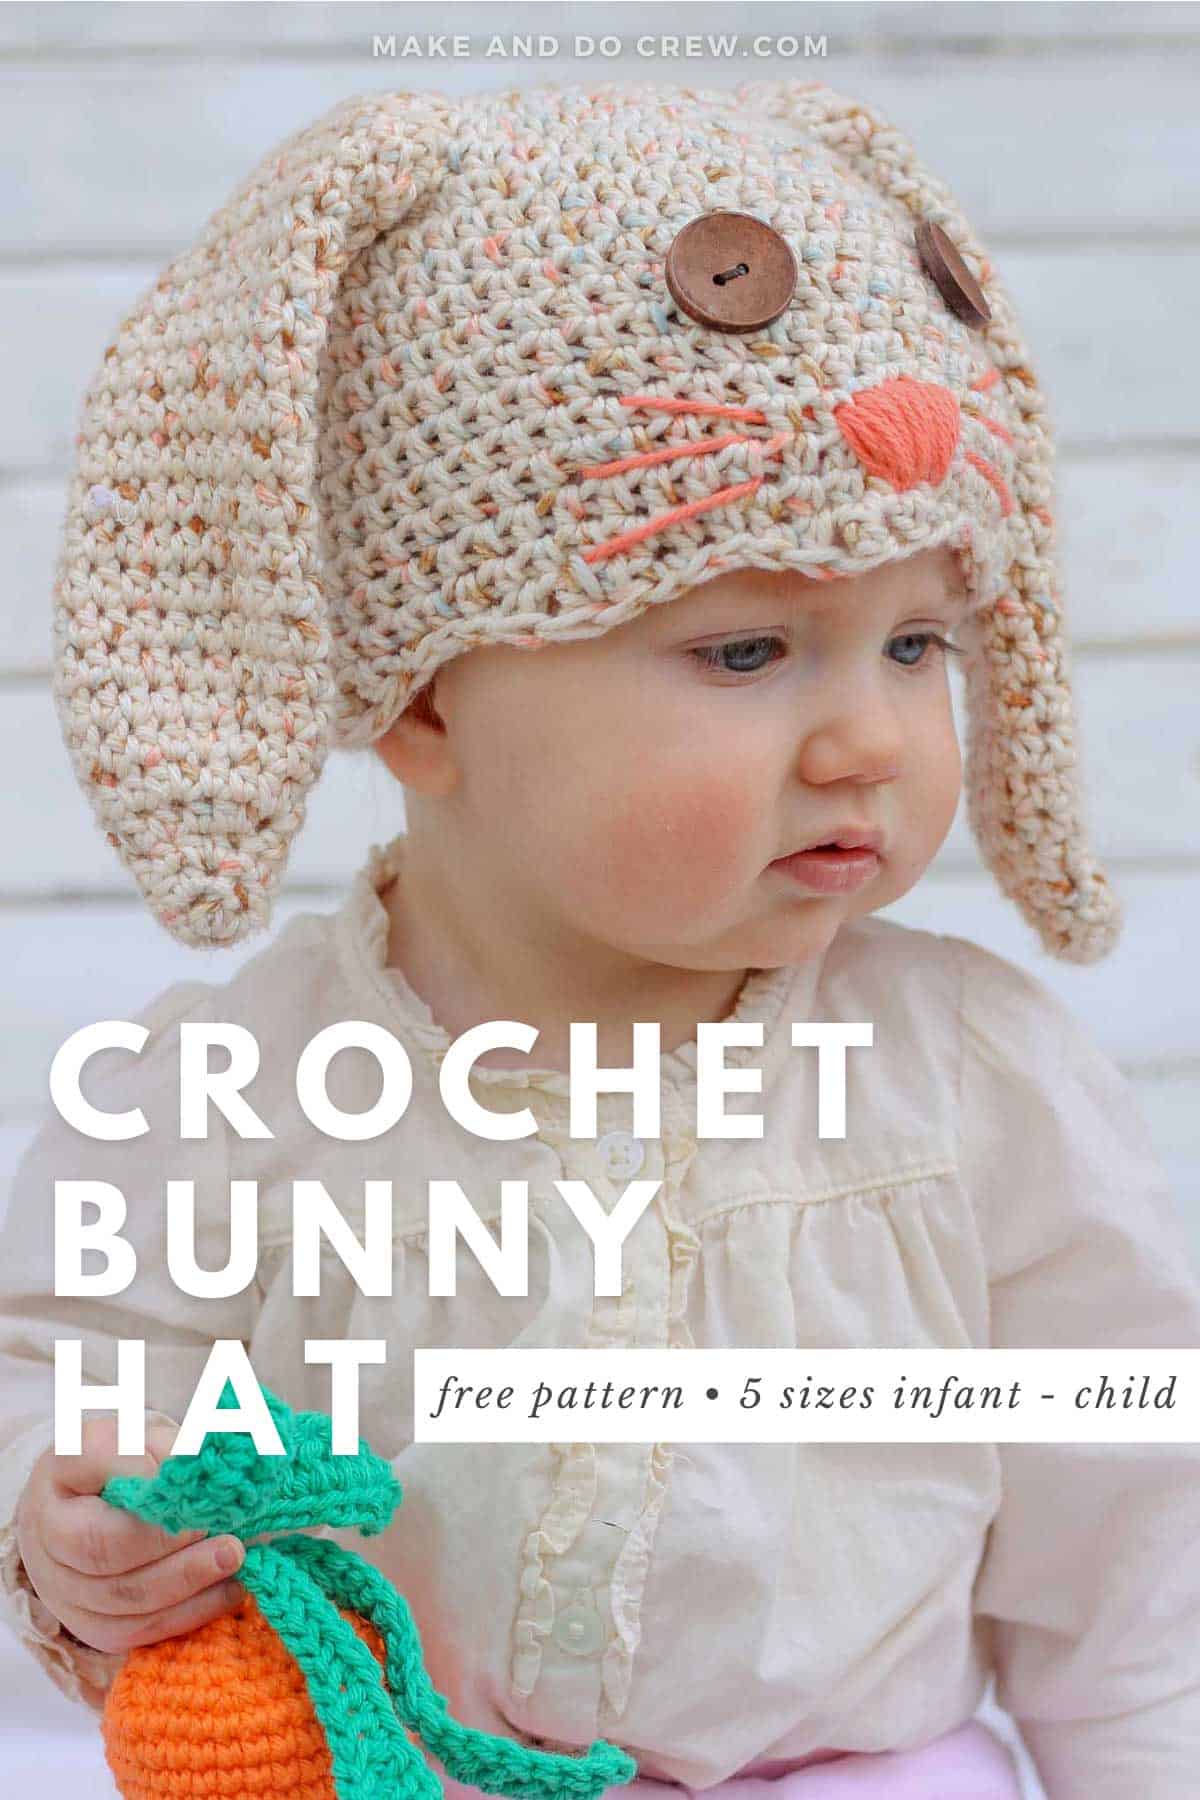 A chubby-cheeked baby wearing a crochet bunny hat complete with button eyes and sweet whiskers.